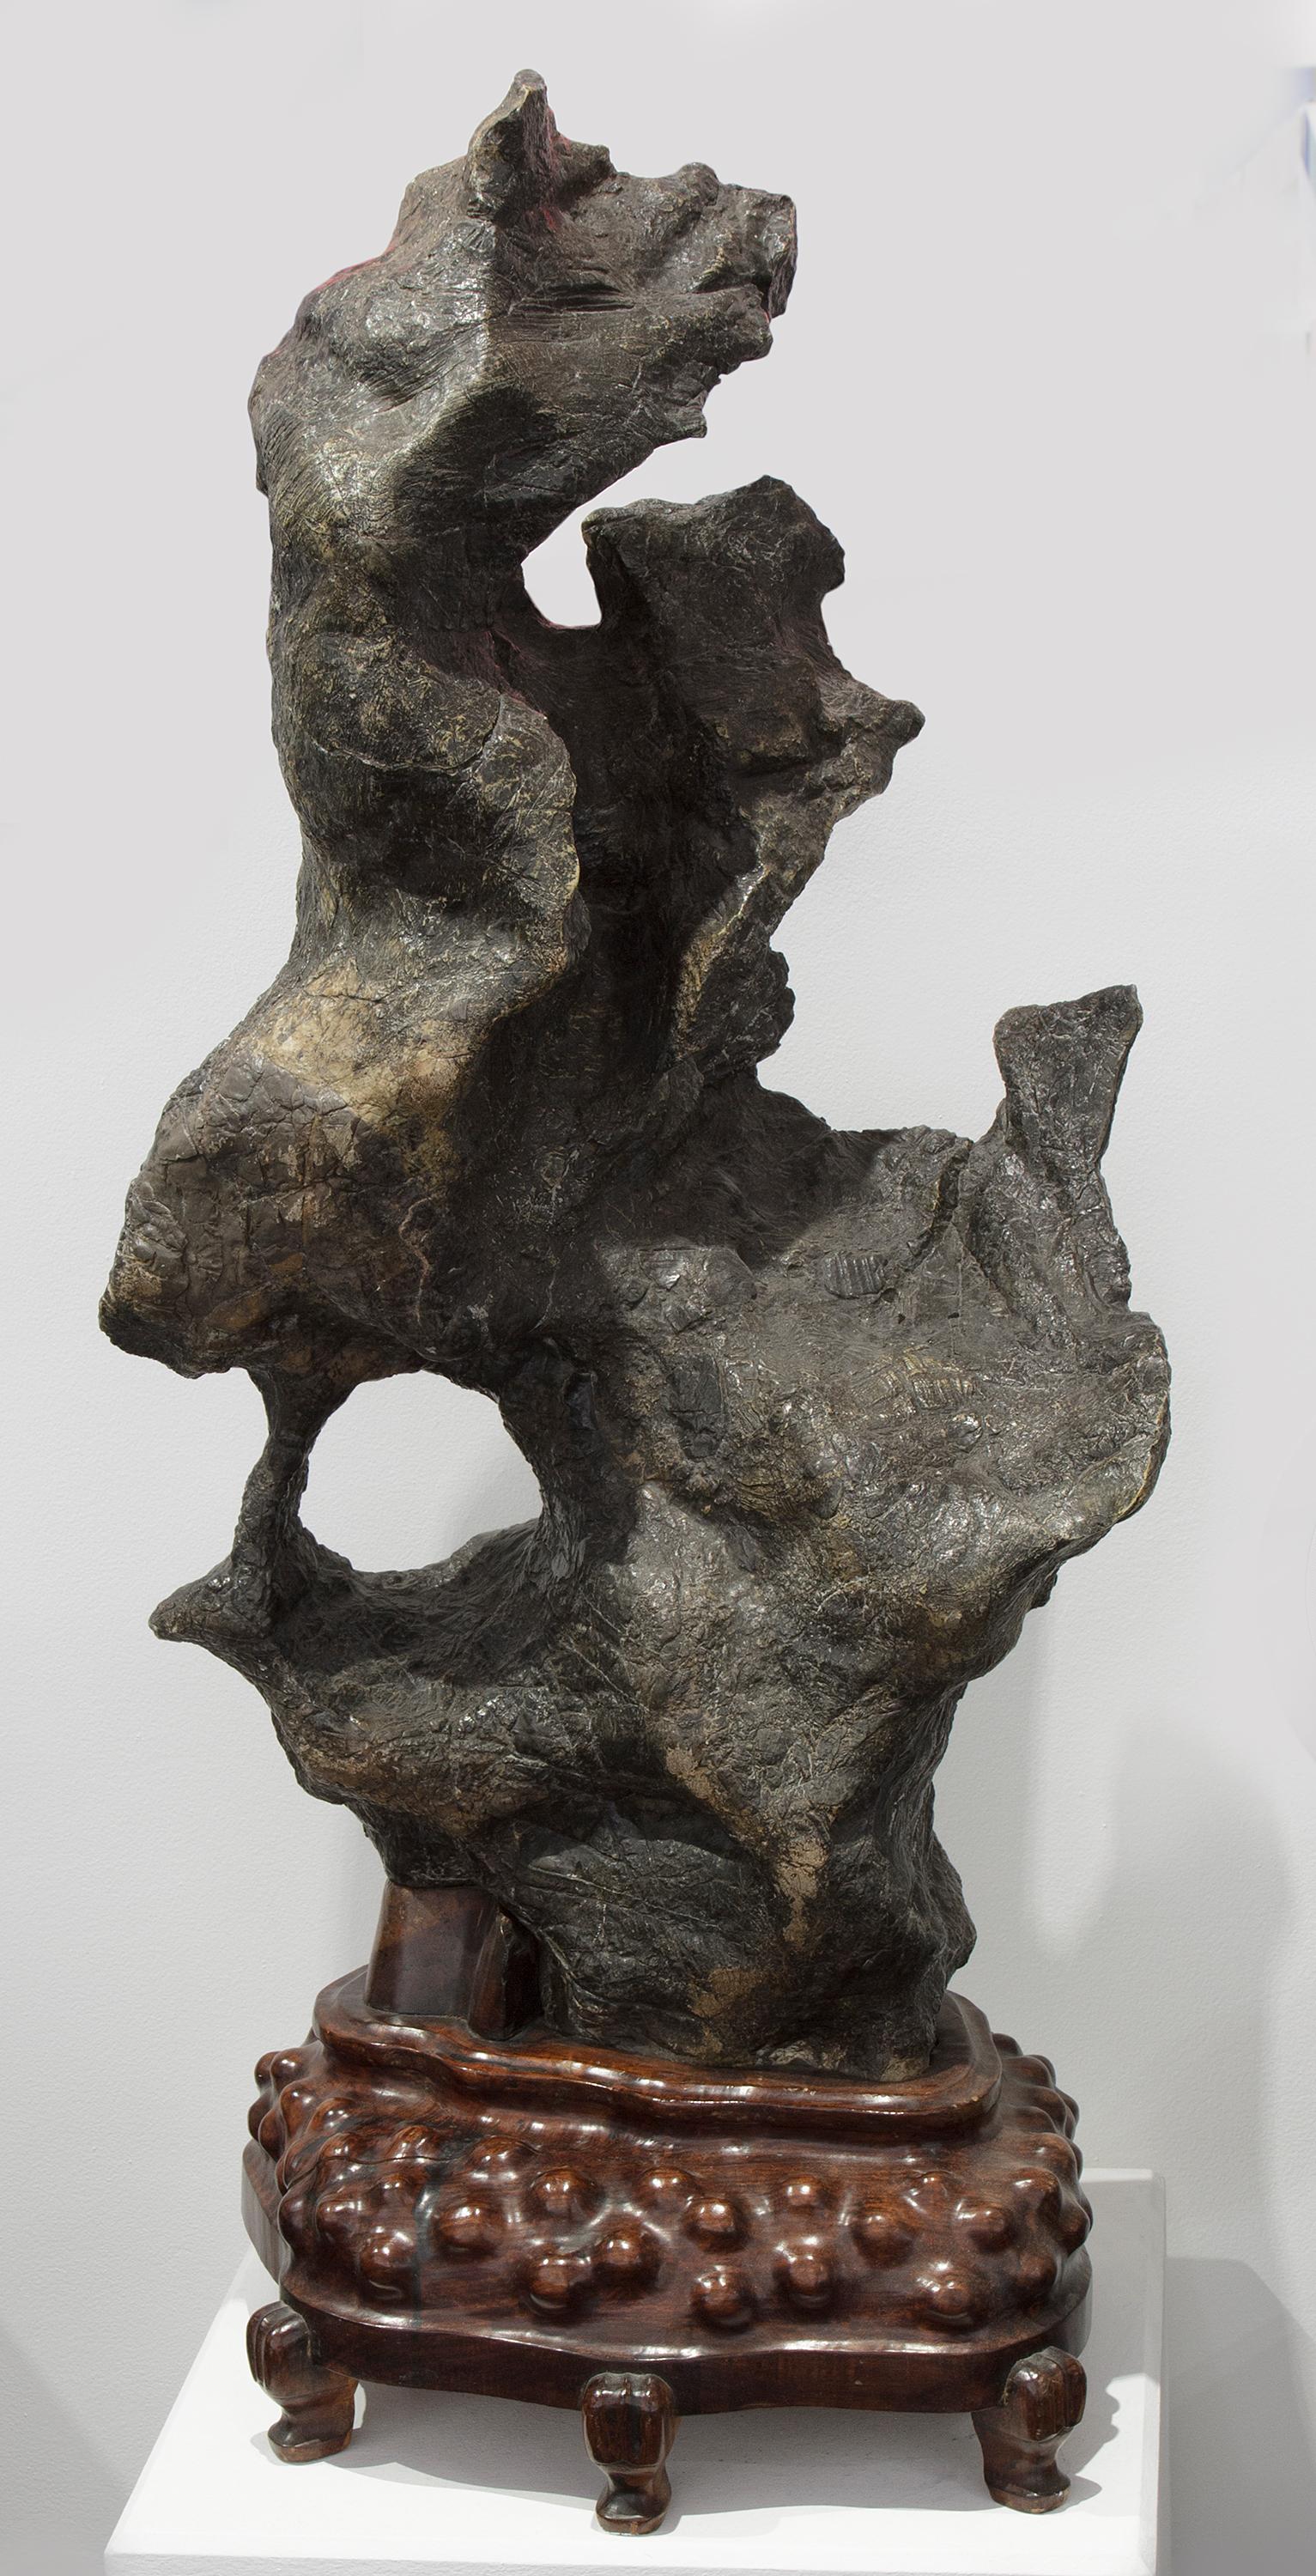 Unknown Abstract Sculpture - Lingbi - One Hole Scholar's Rock, China, Late Qing Dynasty